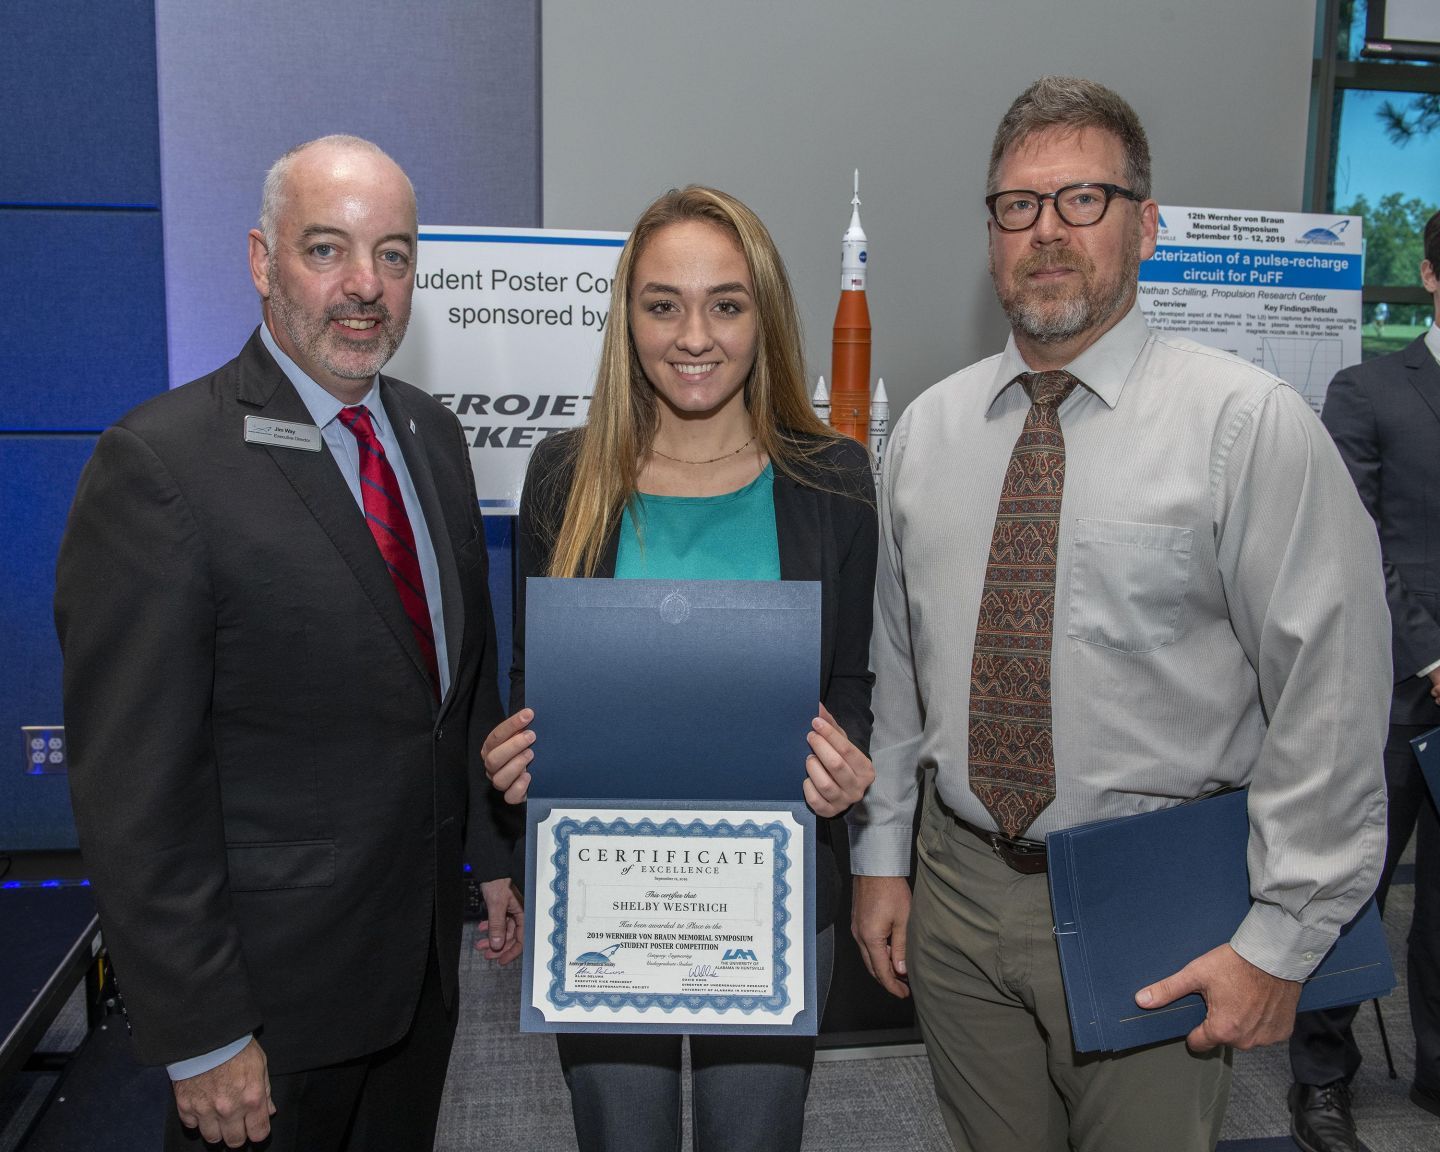 Engineering - First Place - Undergraduate Shelby Westrich, University of Alabama in Huntsville “Pulsed Power Diagnostics for Fusion Propulsion Experiments”